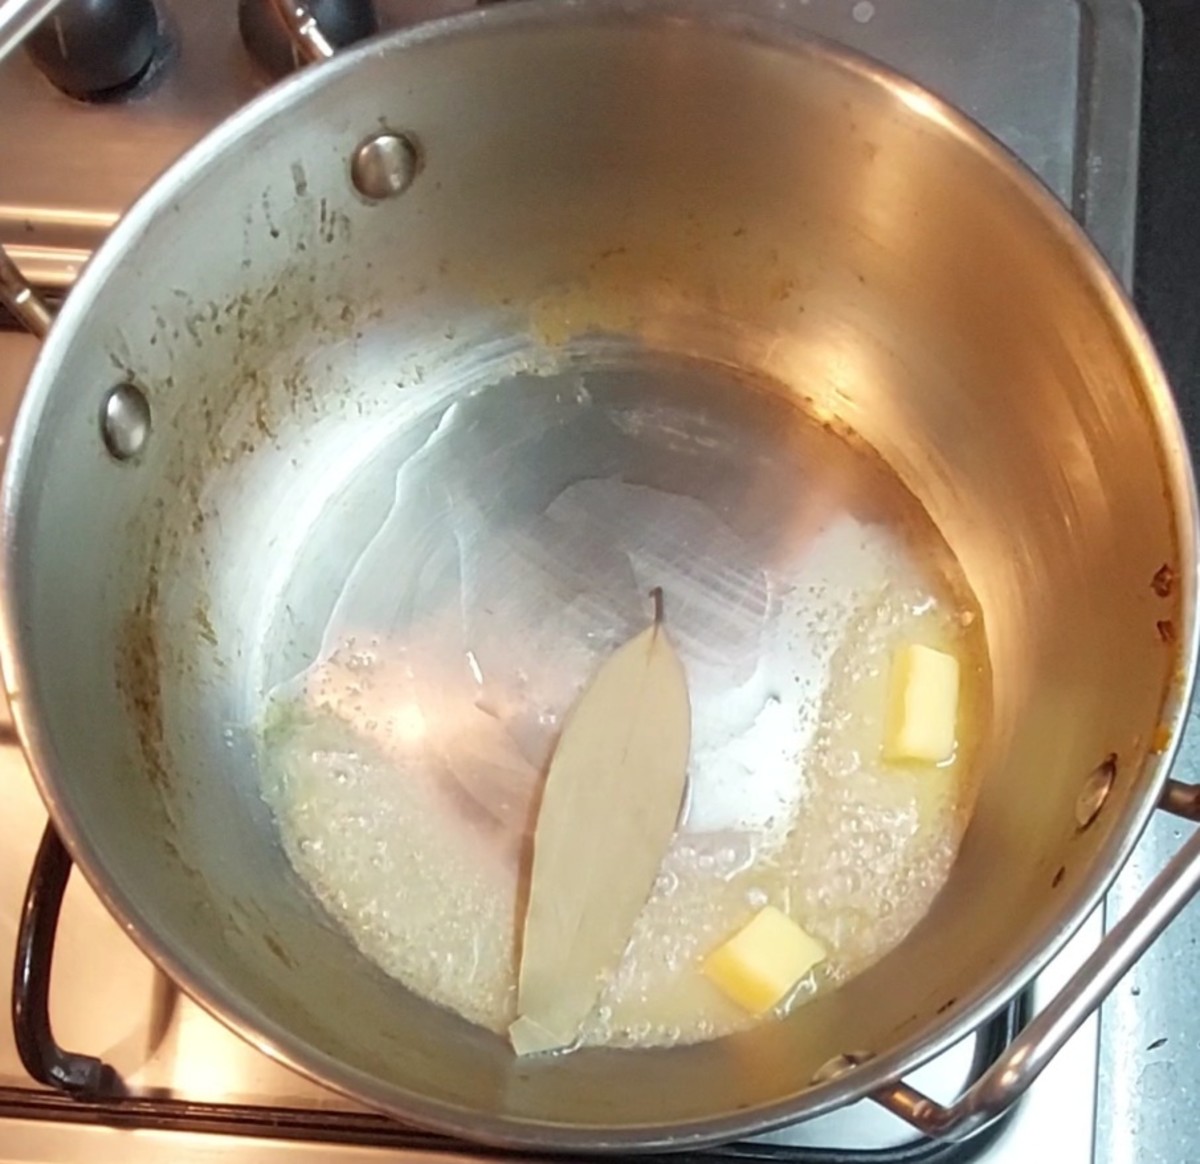 In a pan, heat 2 tablespoons of butter and 1 tablespoon oil or ghee. Add 1-2 bay leaves and saute.